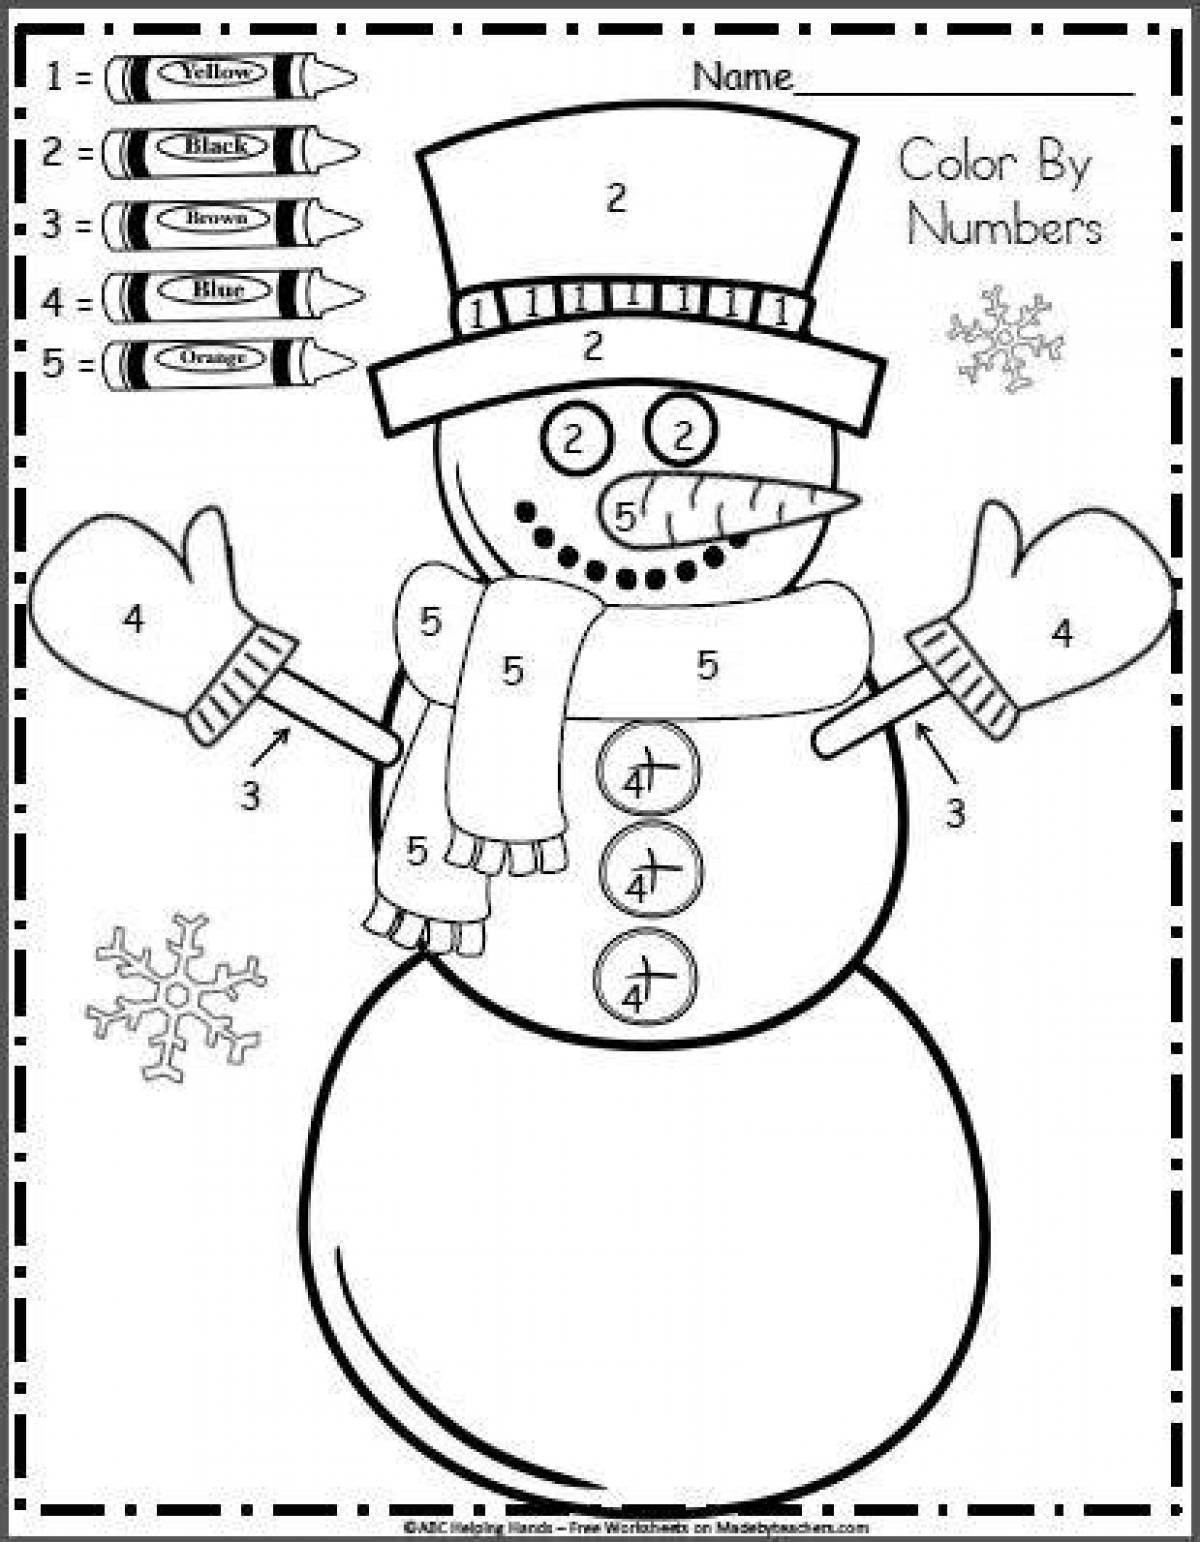 Radiant snowman coloring by numbers